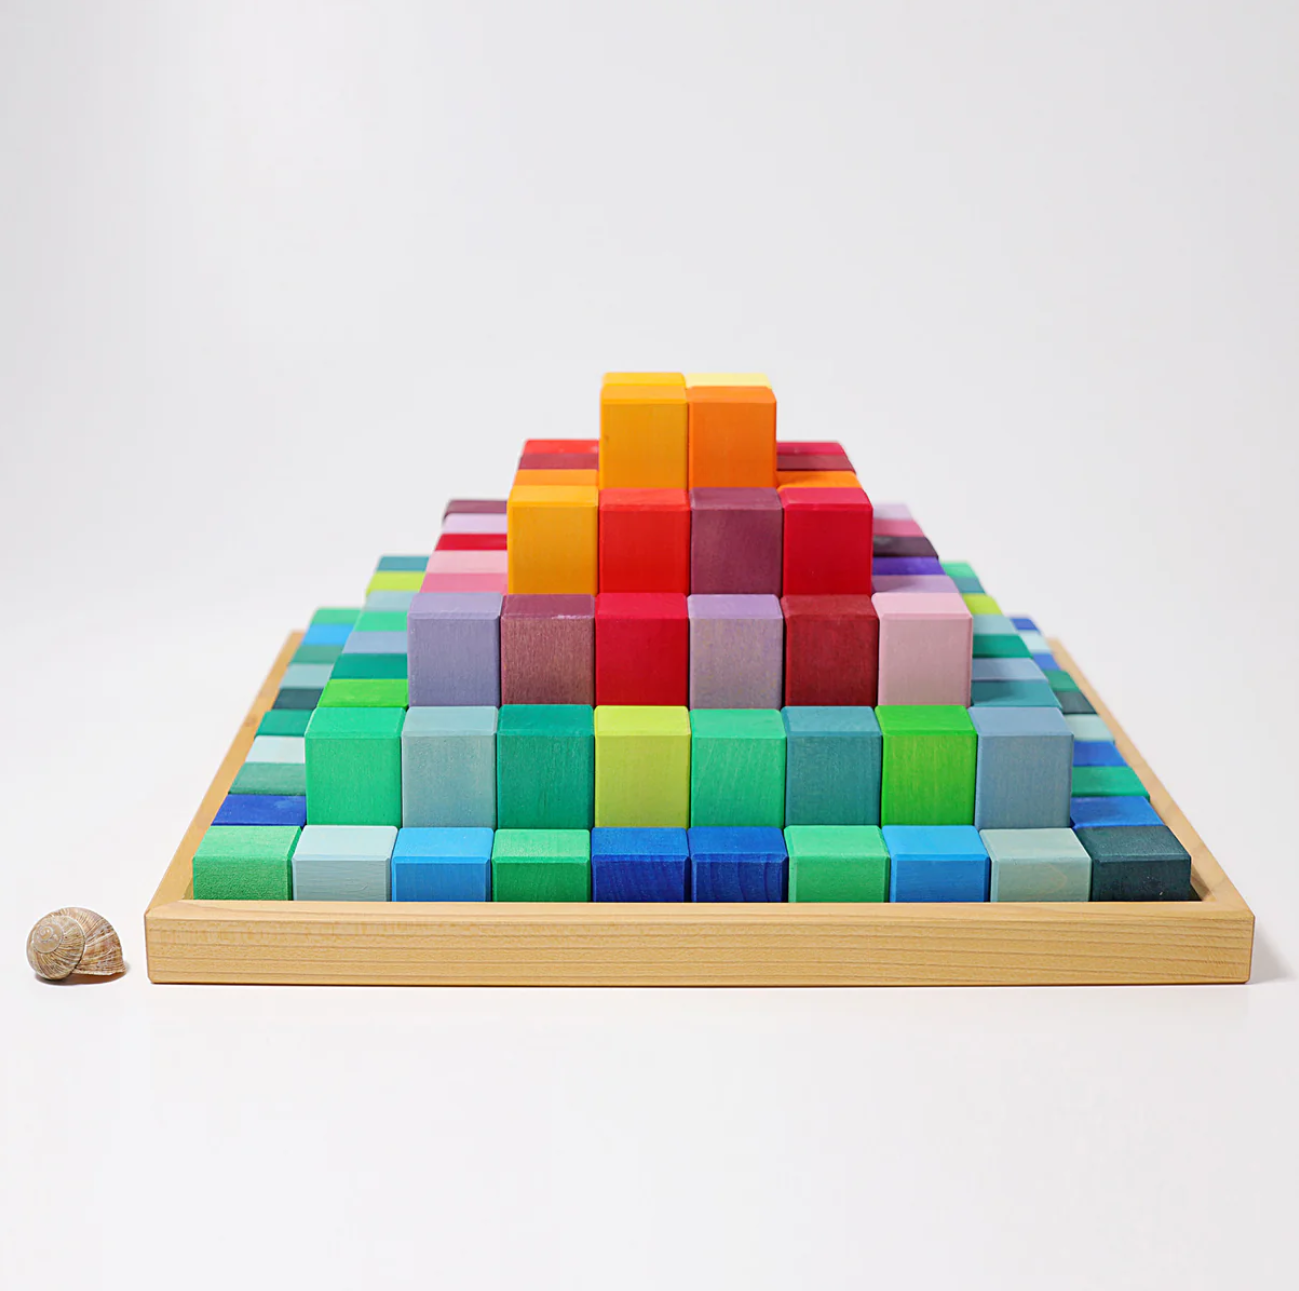 Grimm's Large Stepped Pyramid Building Set